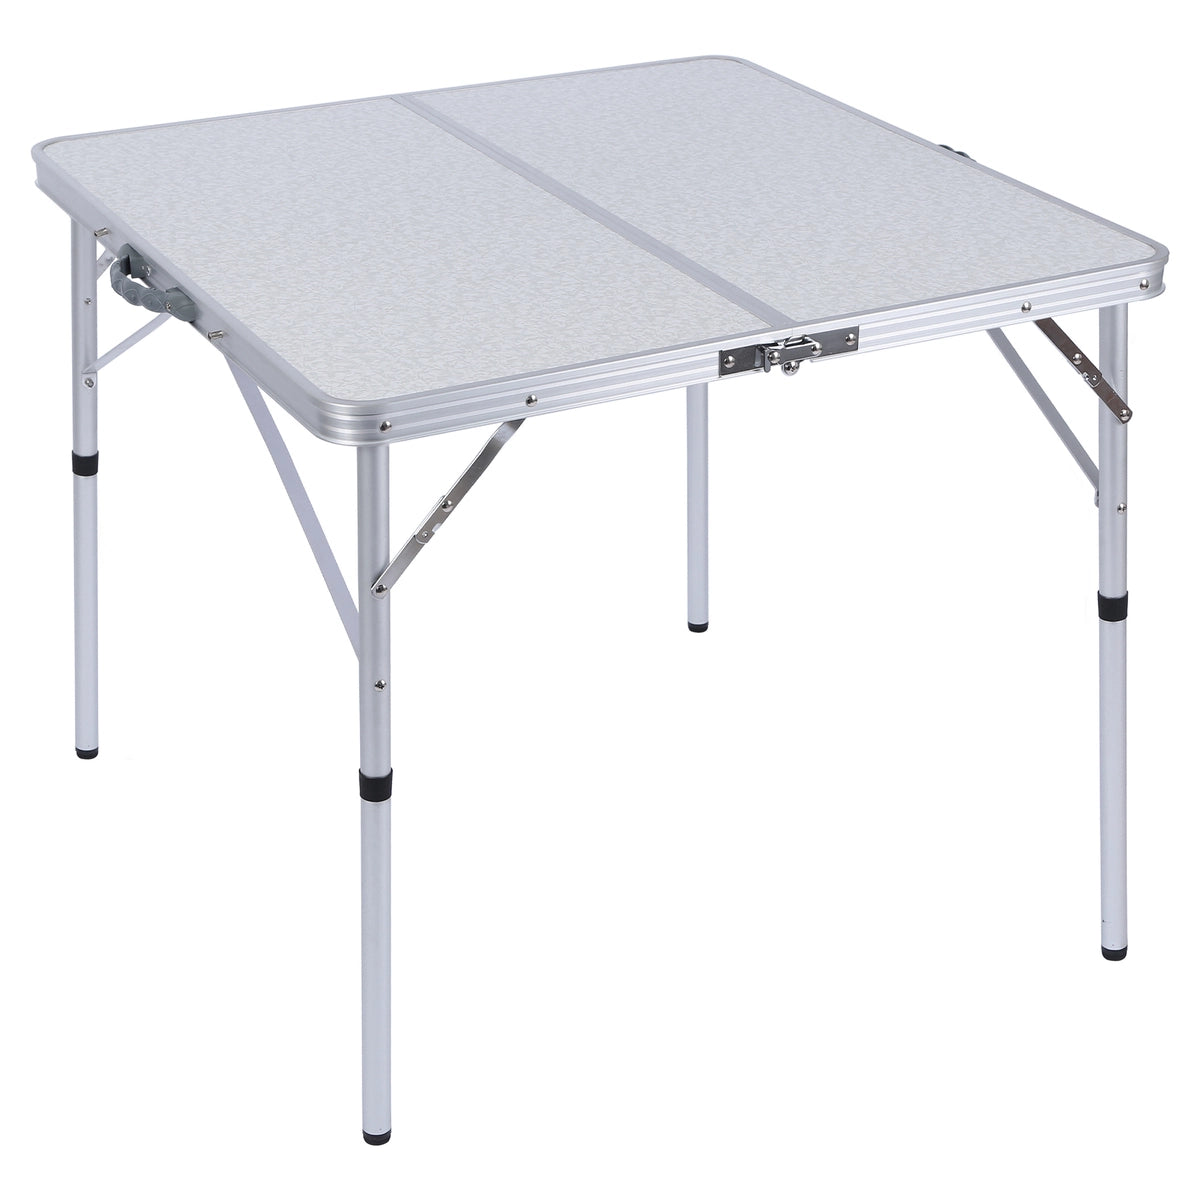 Aluminum Folding Camping Table with Adjustable Height Legs, 2/3/4ft